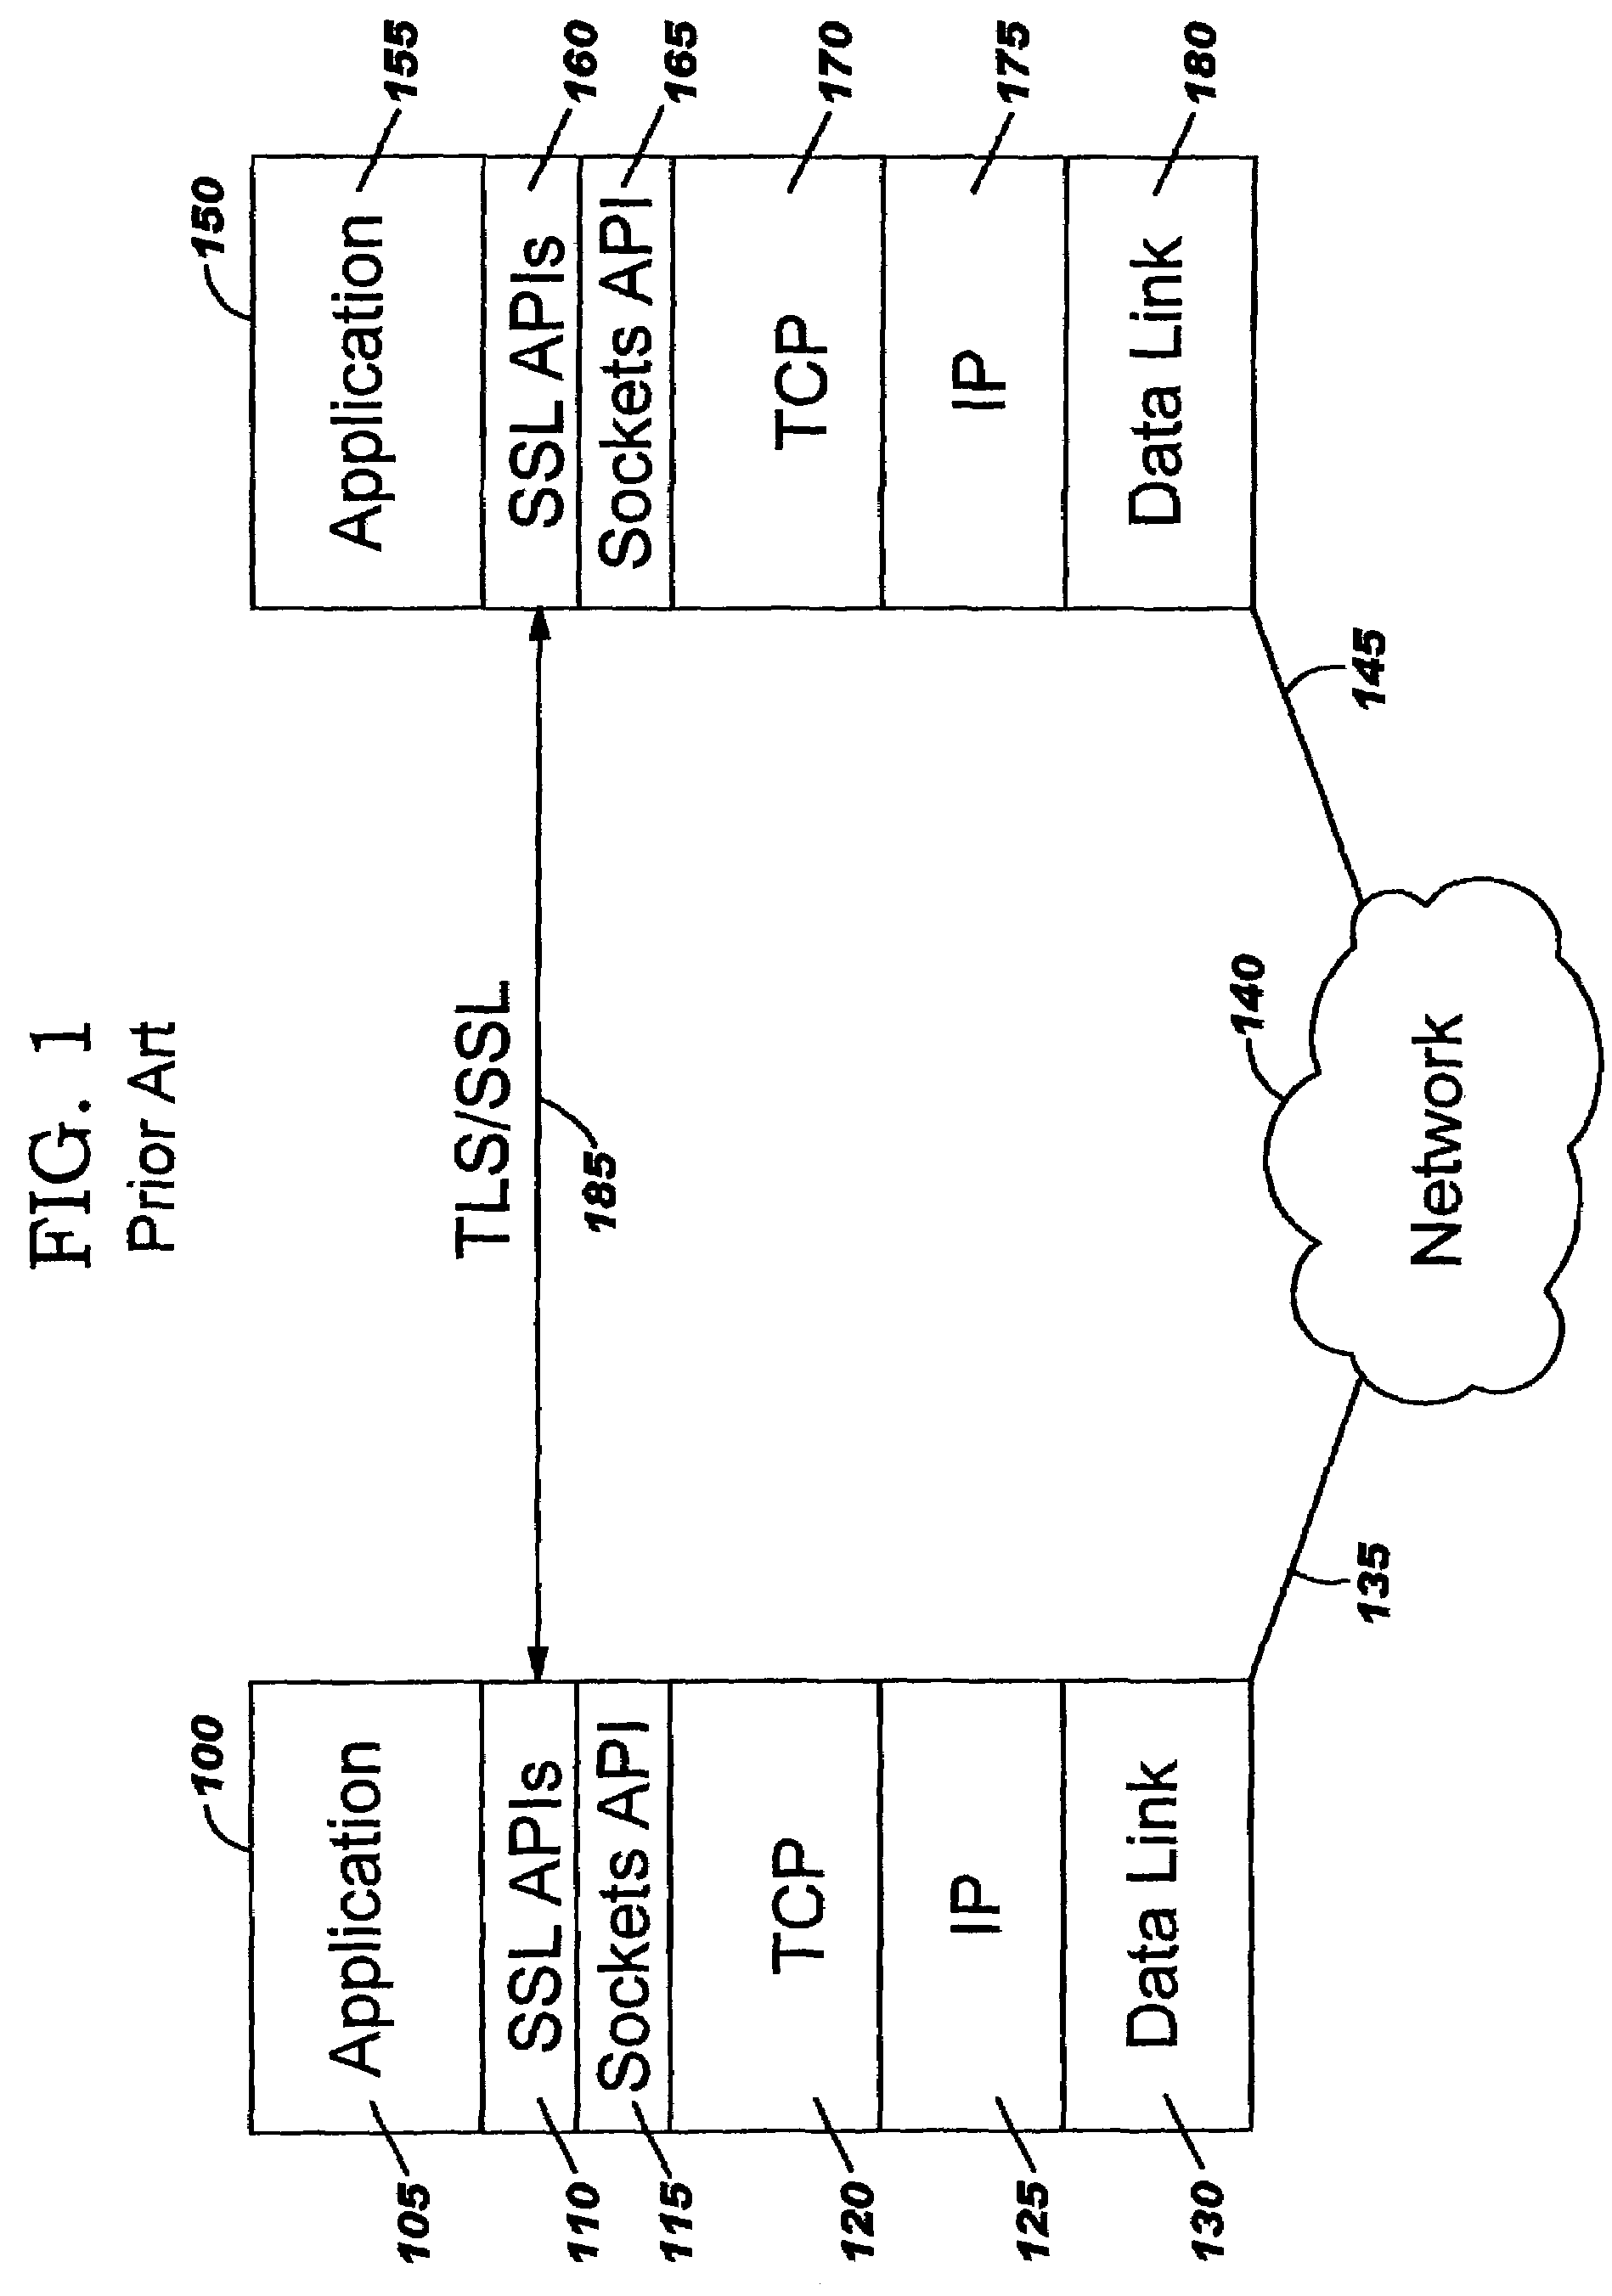 Offload processing for secure data transfer